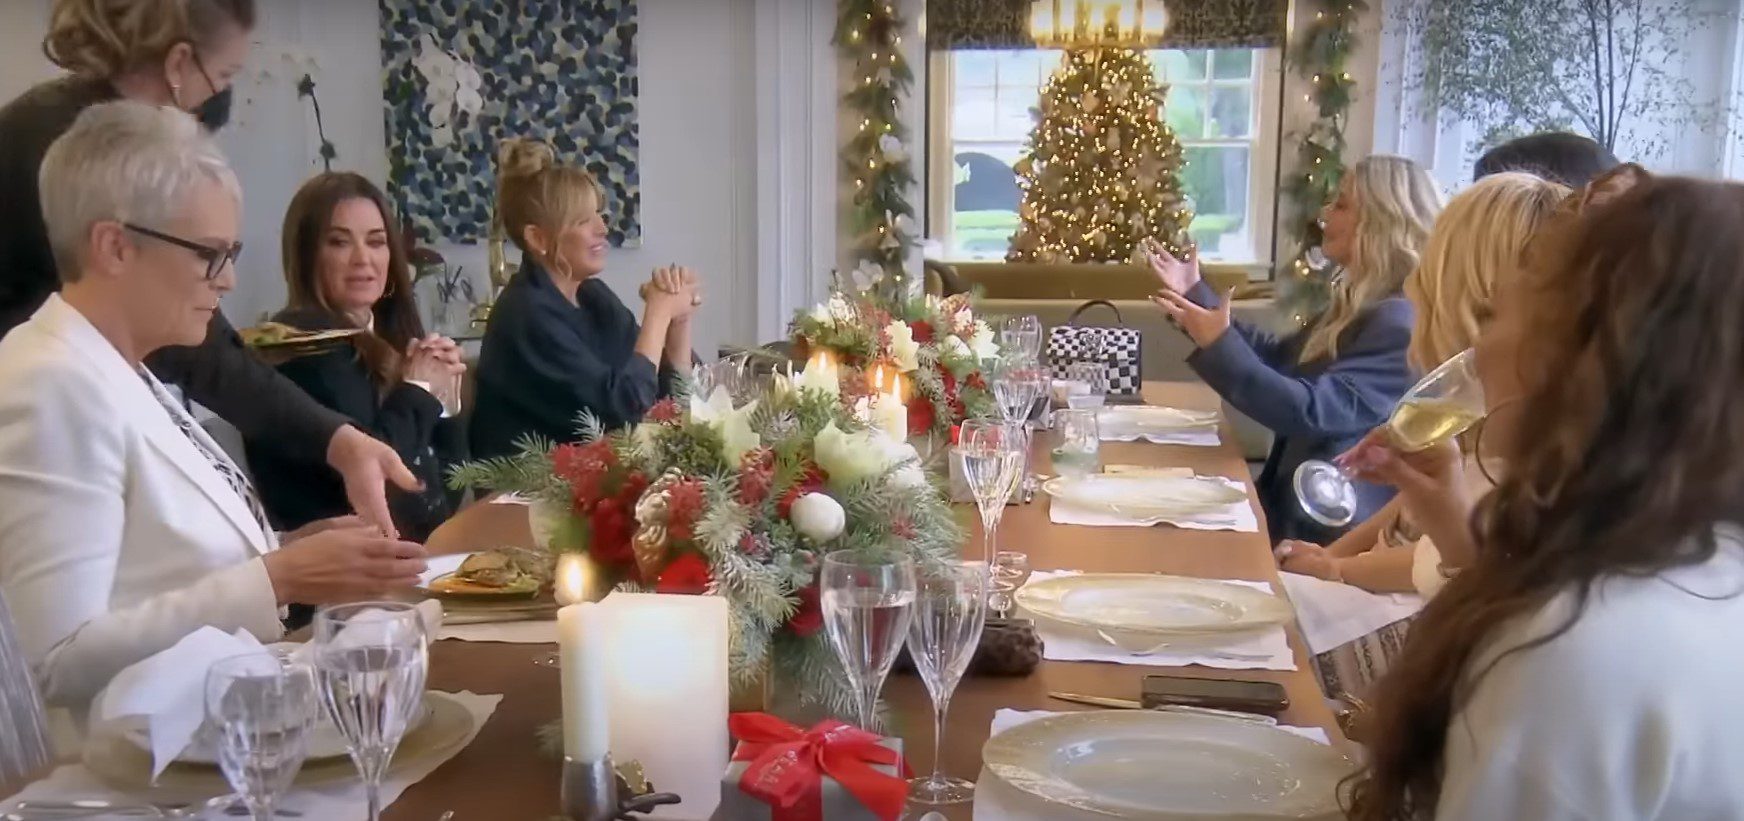 The Real Housewives of Beverly Hills Season 12 Episode 11 Recap